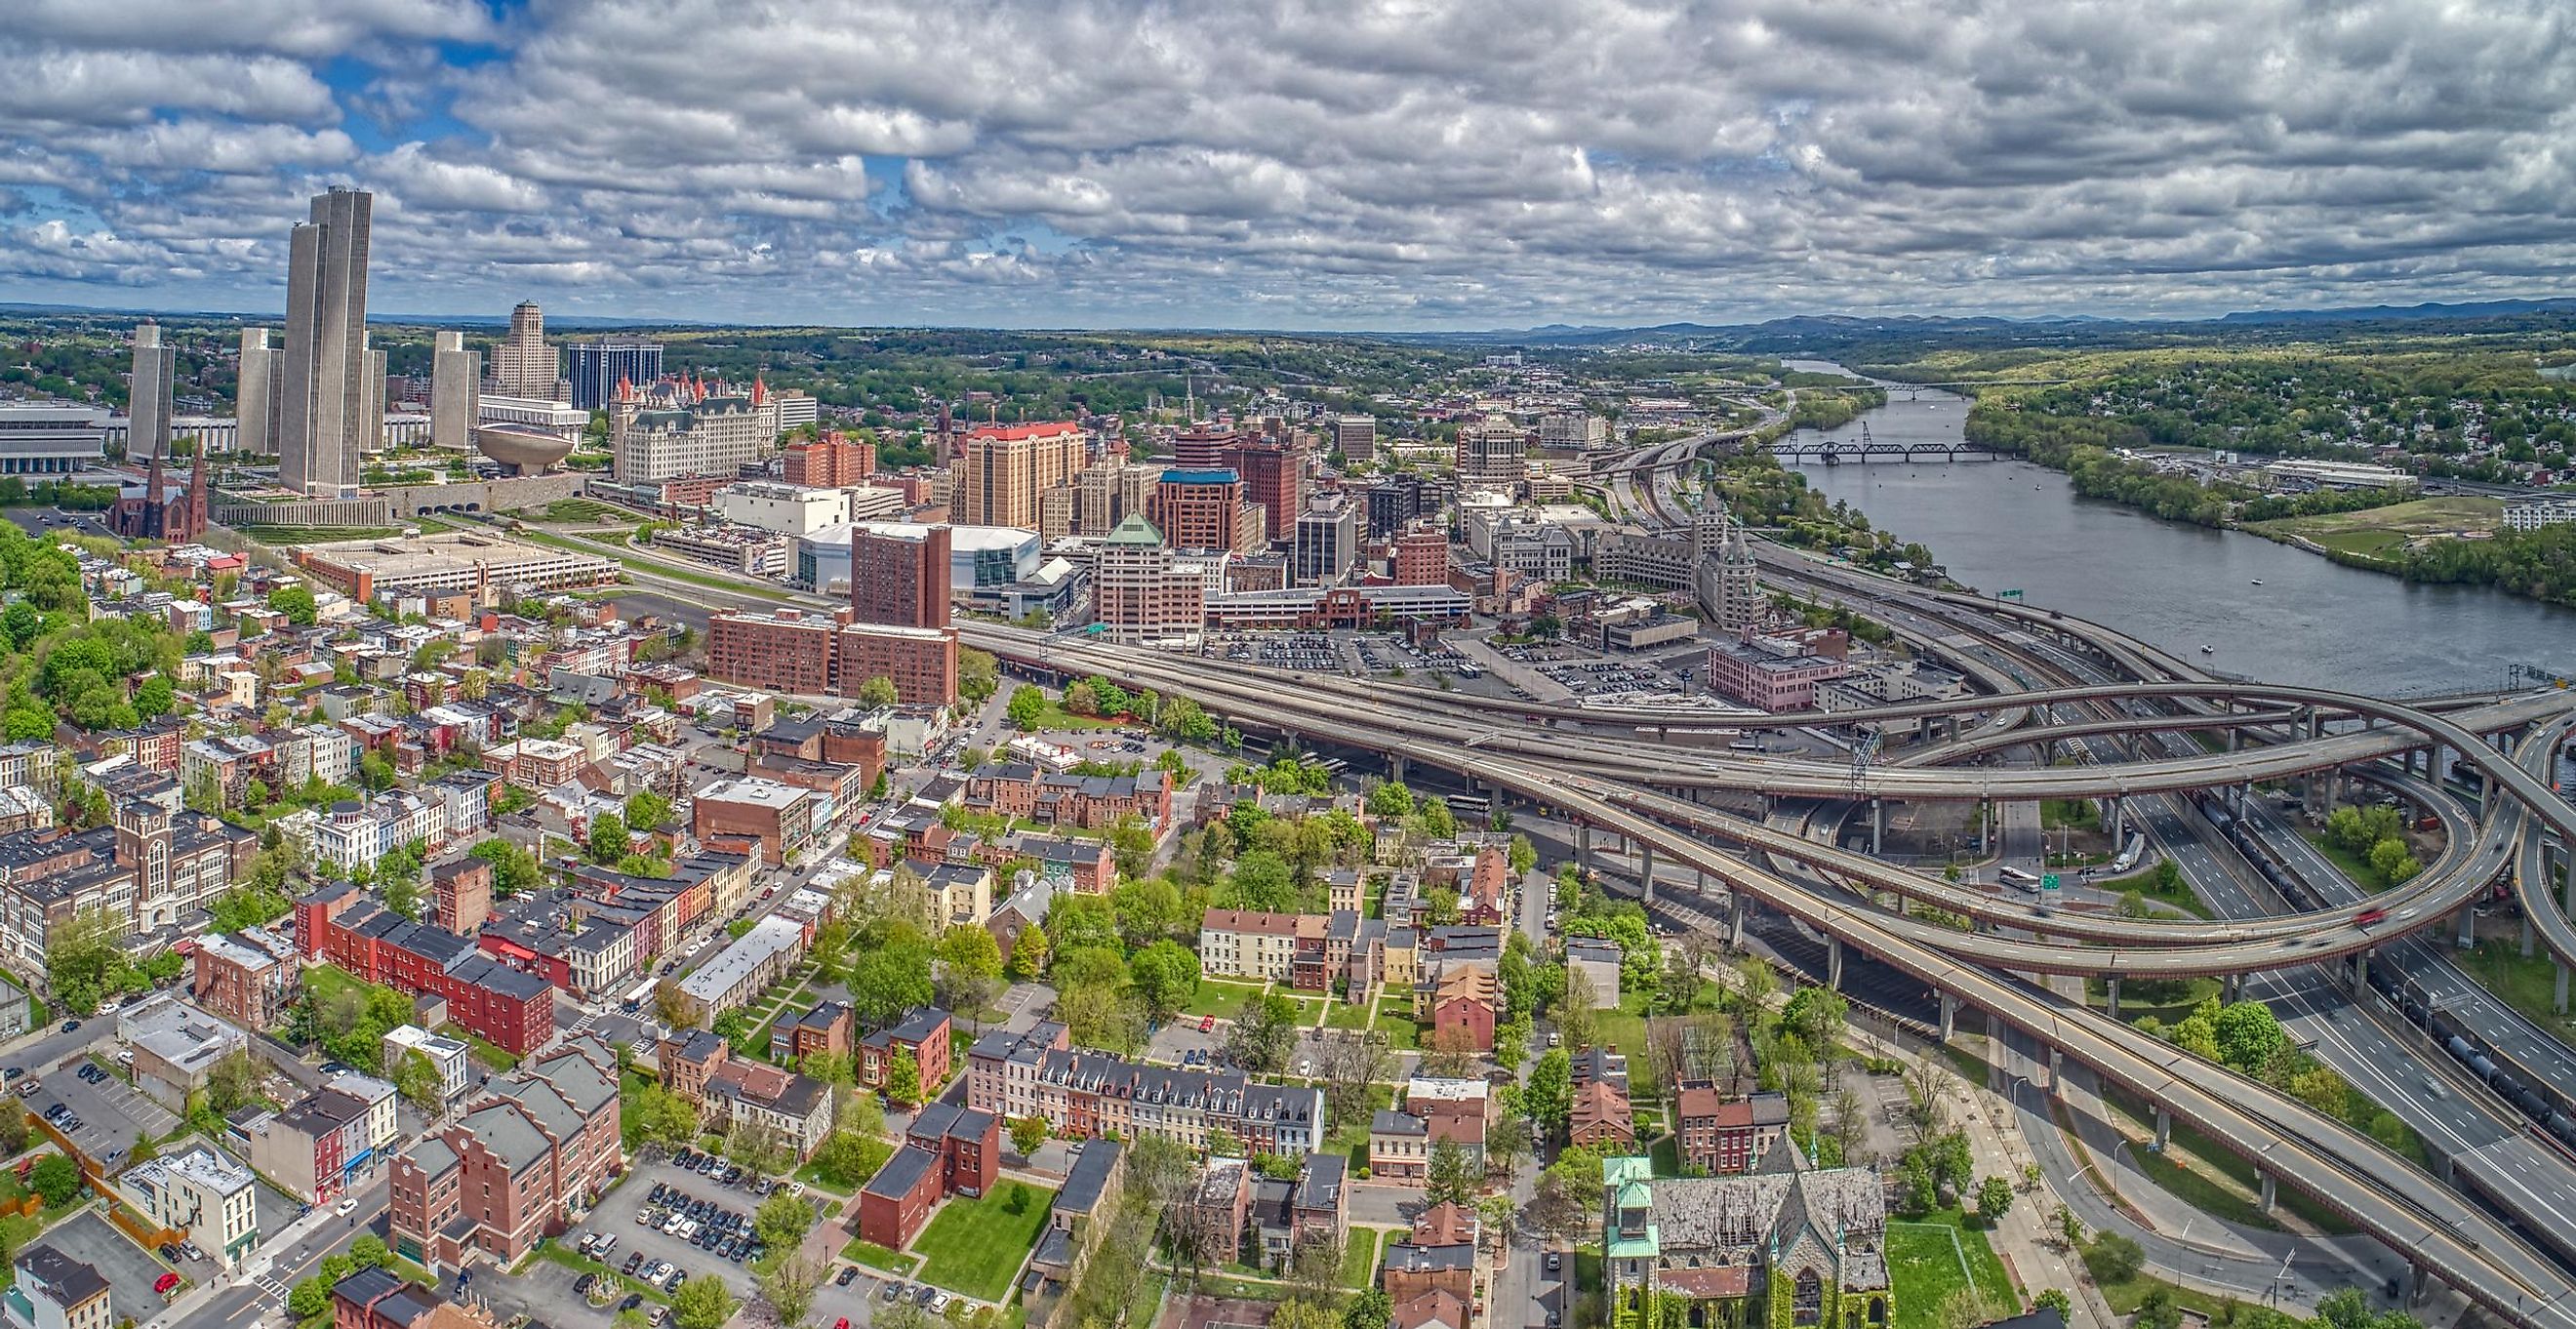 Aerial view of Albany, the capital city of New York.